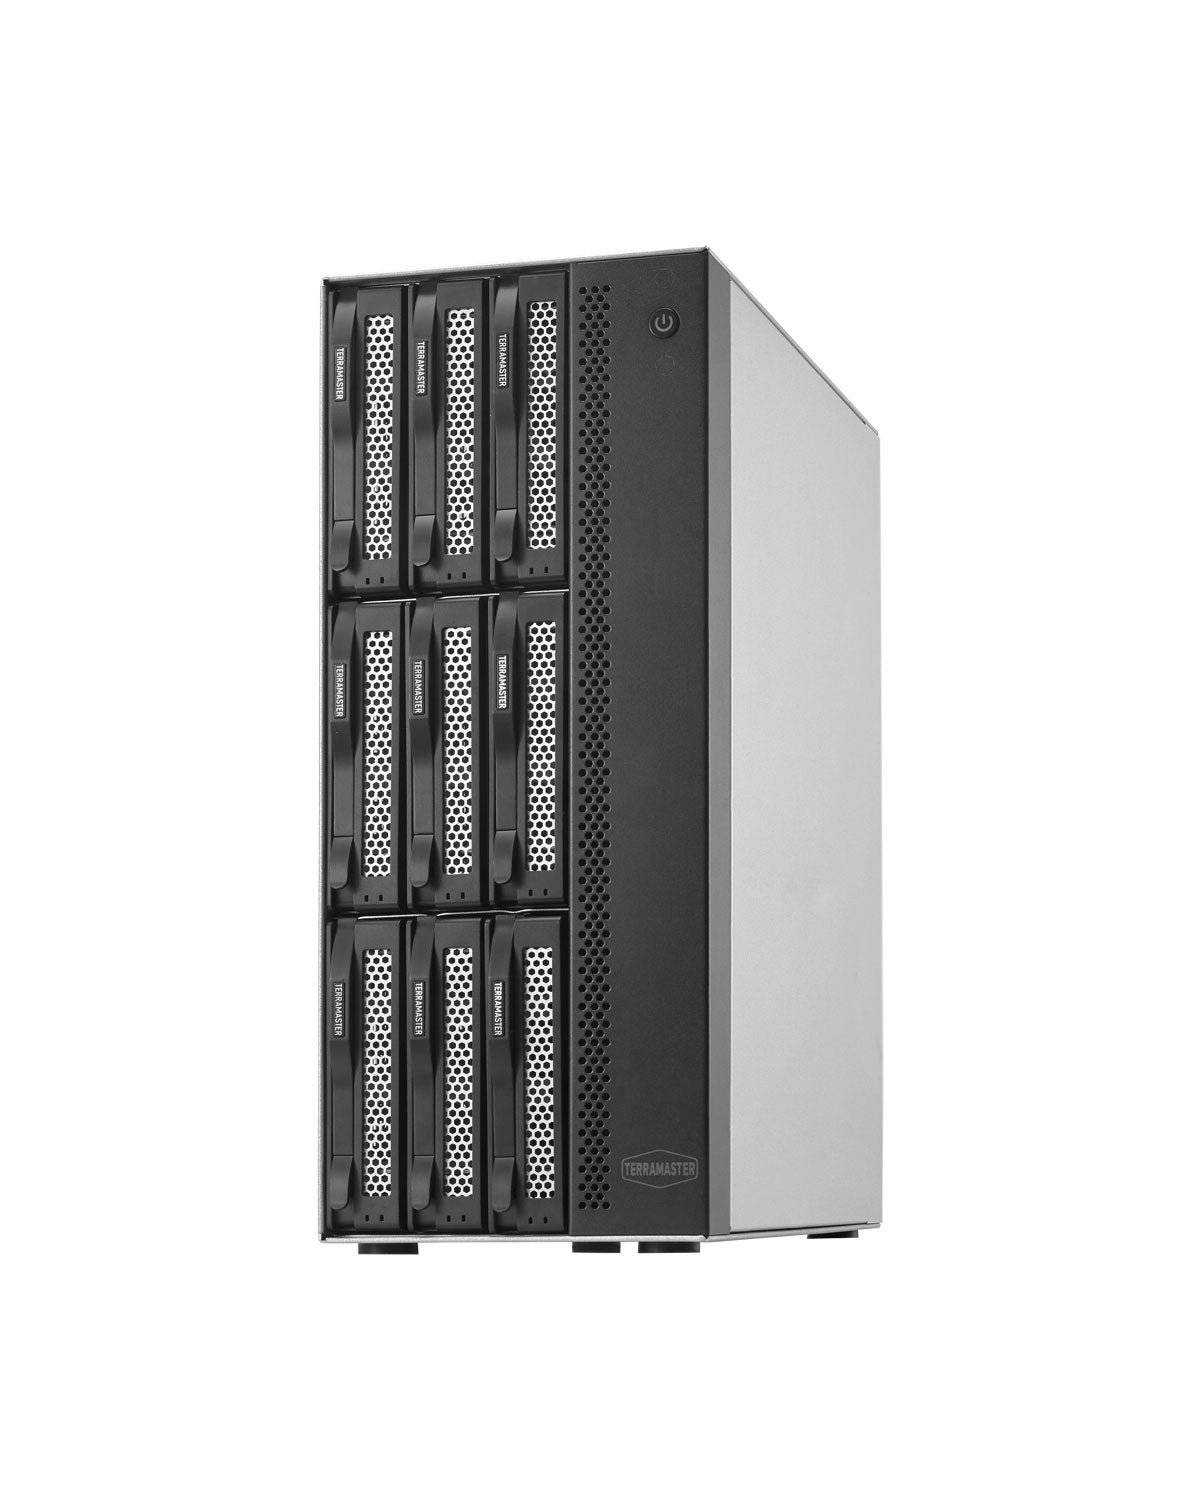 TERRAMASTER T9-423 9Bay NAS Storage - High Performance NAS for SMB with N5105/5095 QuadCore CPU 8GB DDR4 Memory, 2.5GbE Port x 2, Network Storage Server, Diskless.